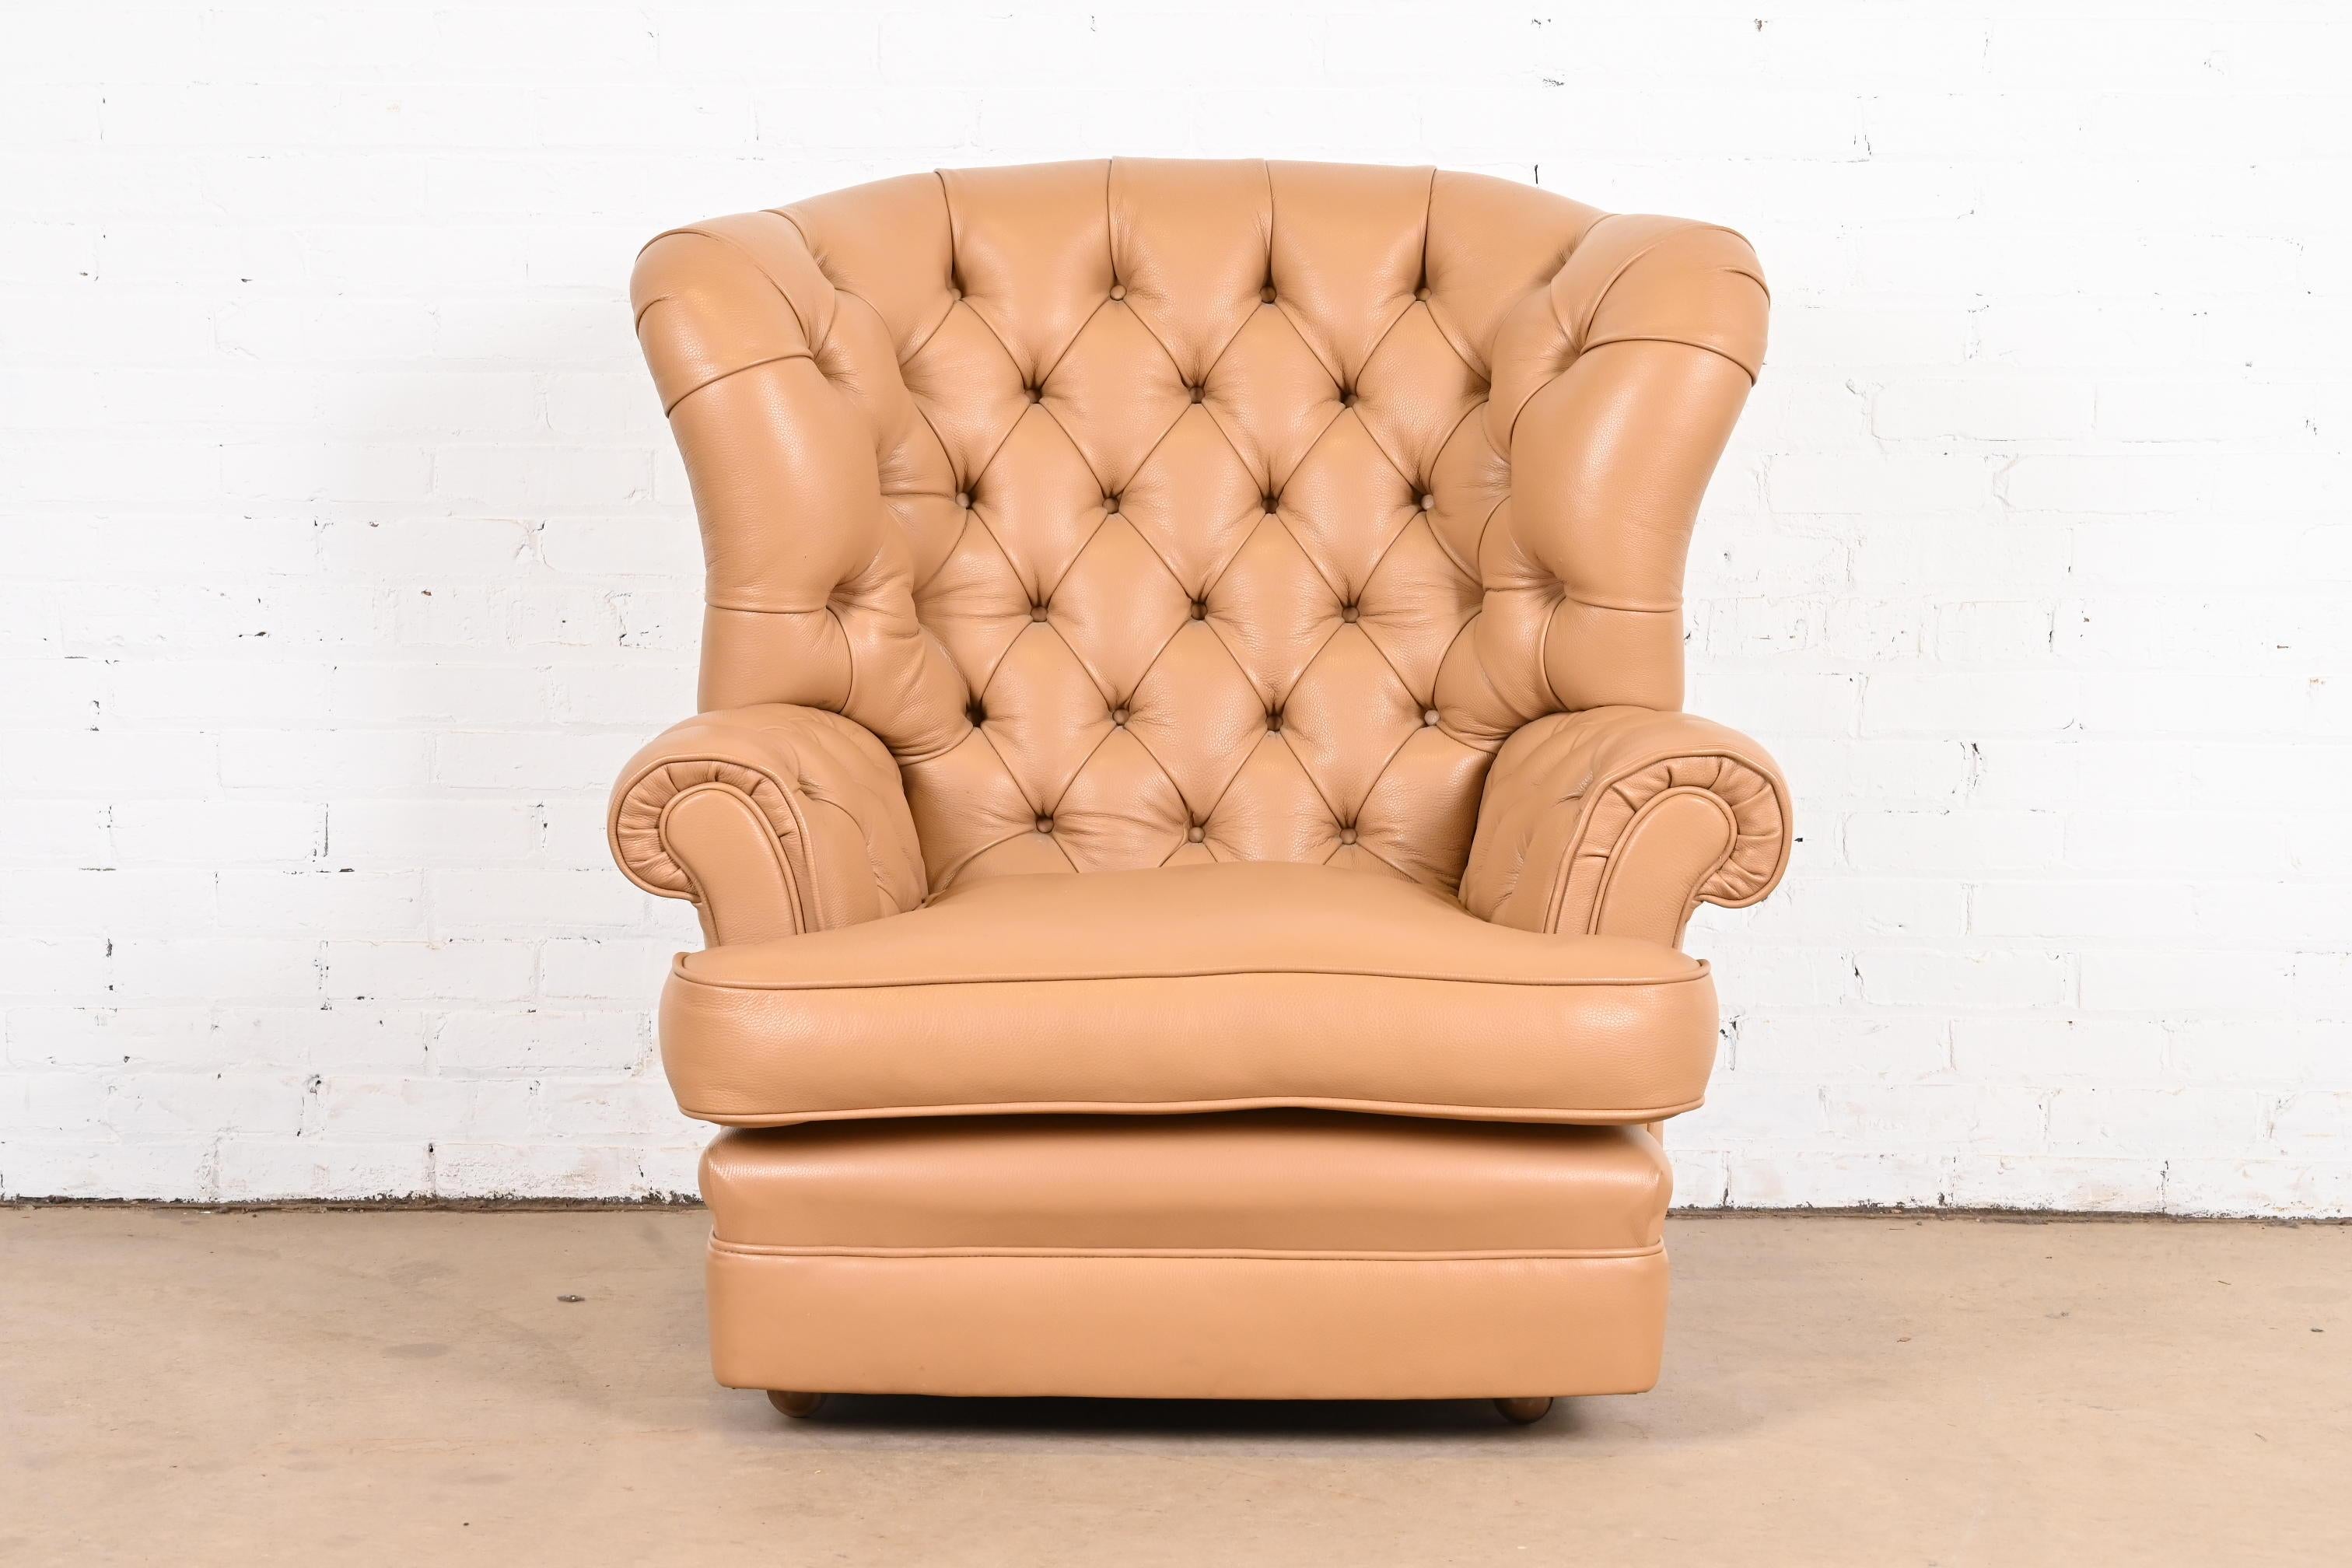 A gorgeous Chesterfield style wingback fireside chair, club chair, or lounge chair

USA, Late 20th Century

Tufted leather, on rolling castors.

Measures: 38